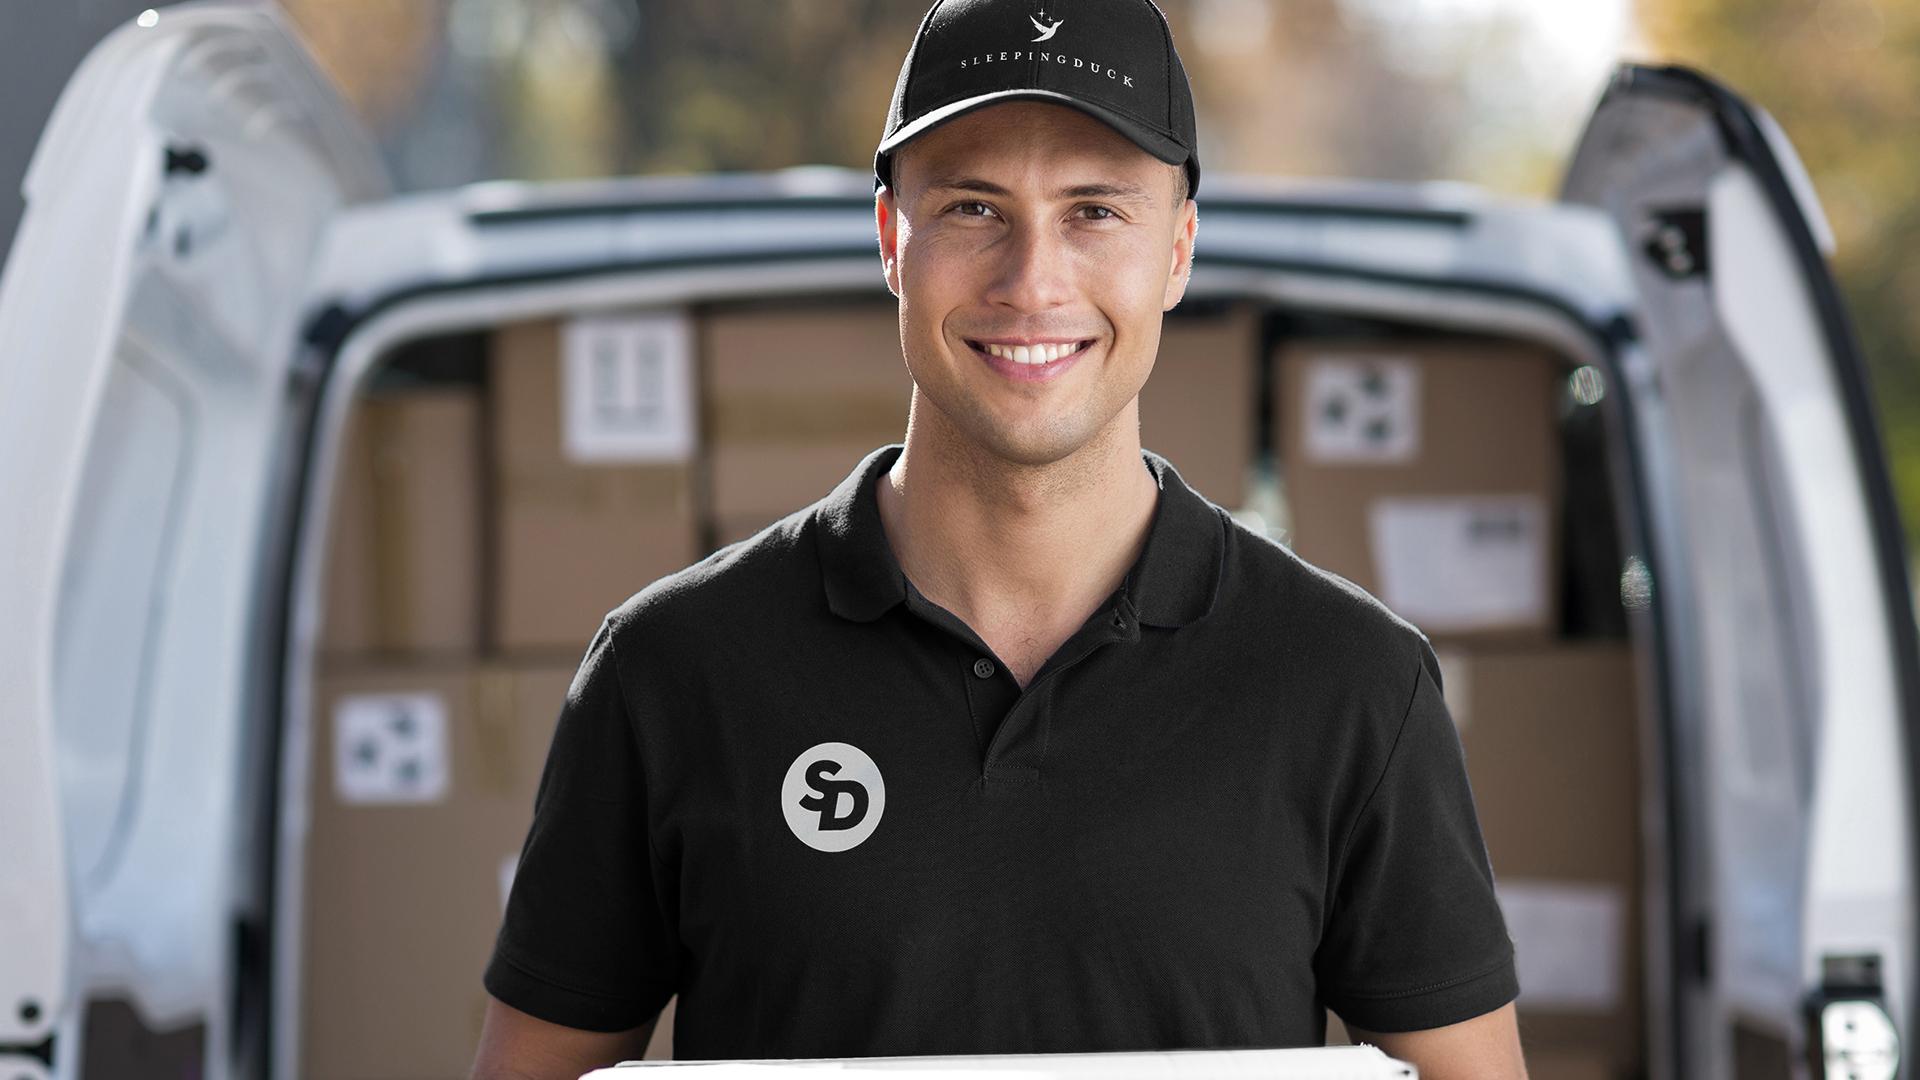 Delivery man in a Sleeping Duck uniform smiling in front of a full delivery van.